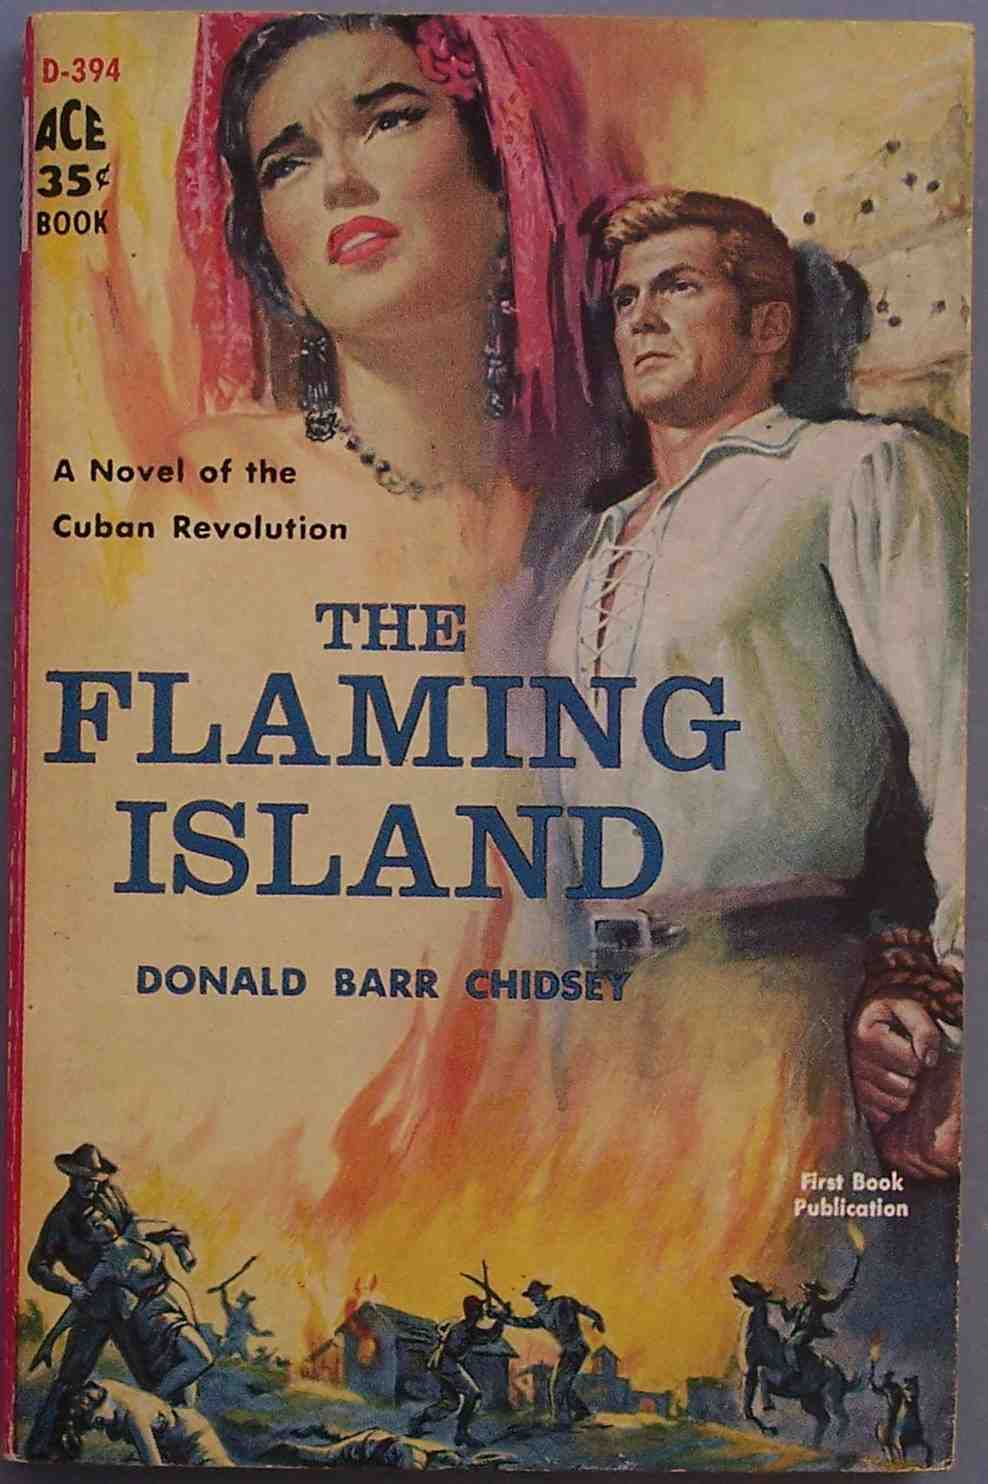 an old book cover with an image of a man and a woman in the background